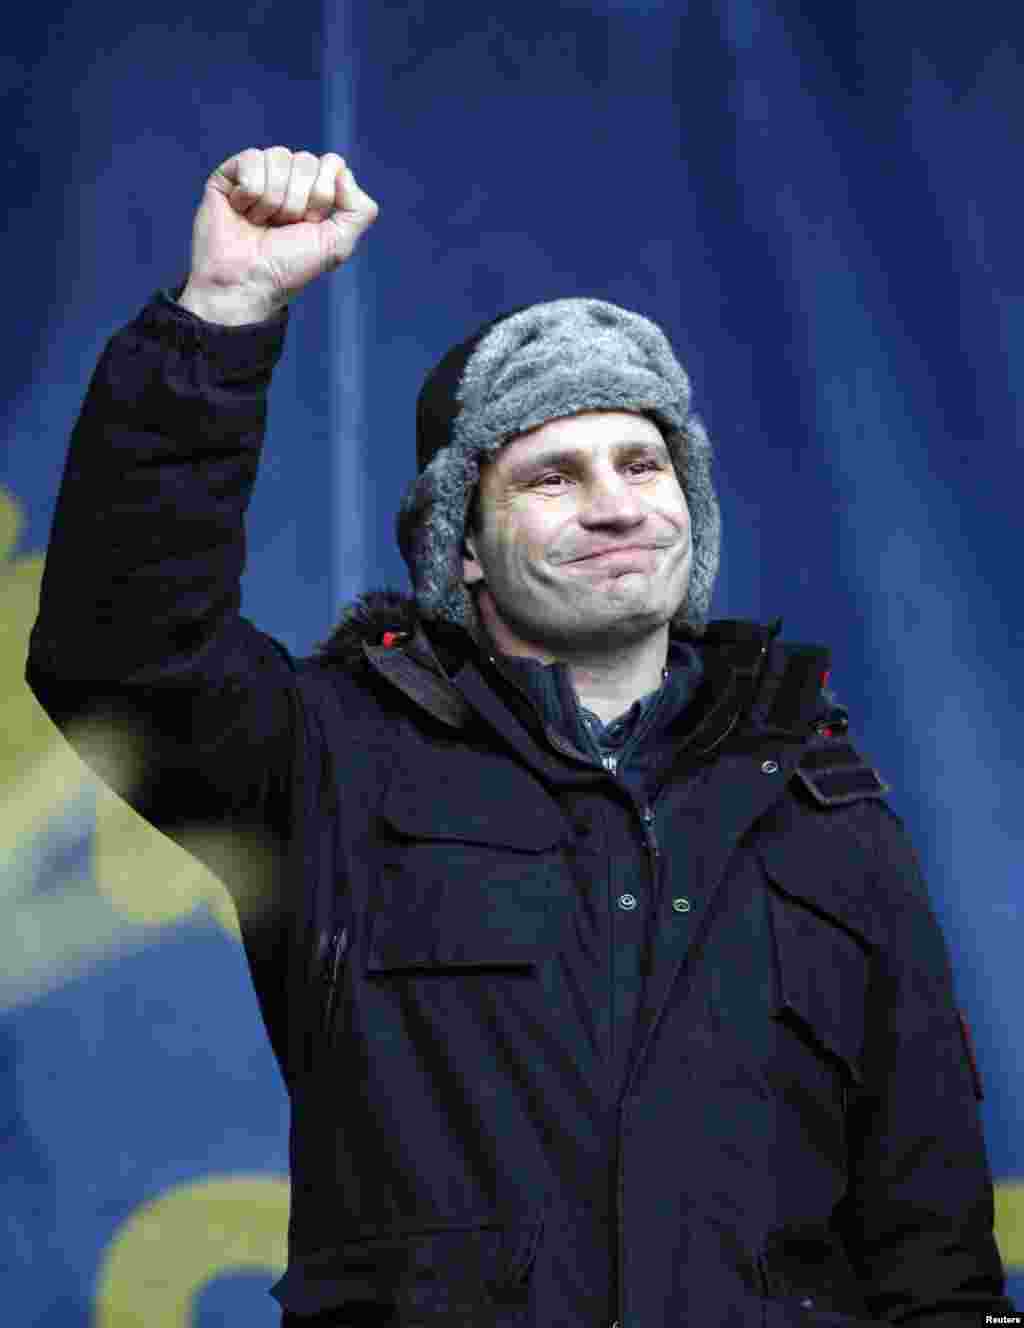 Opposition leader Vitaly Klitschko gestures to the crowd during a pro-European rally in Independence Square, Kyiv, Ukraine, Jan. 19, 2014.